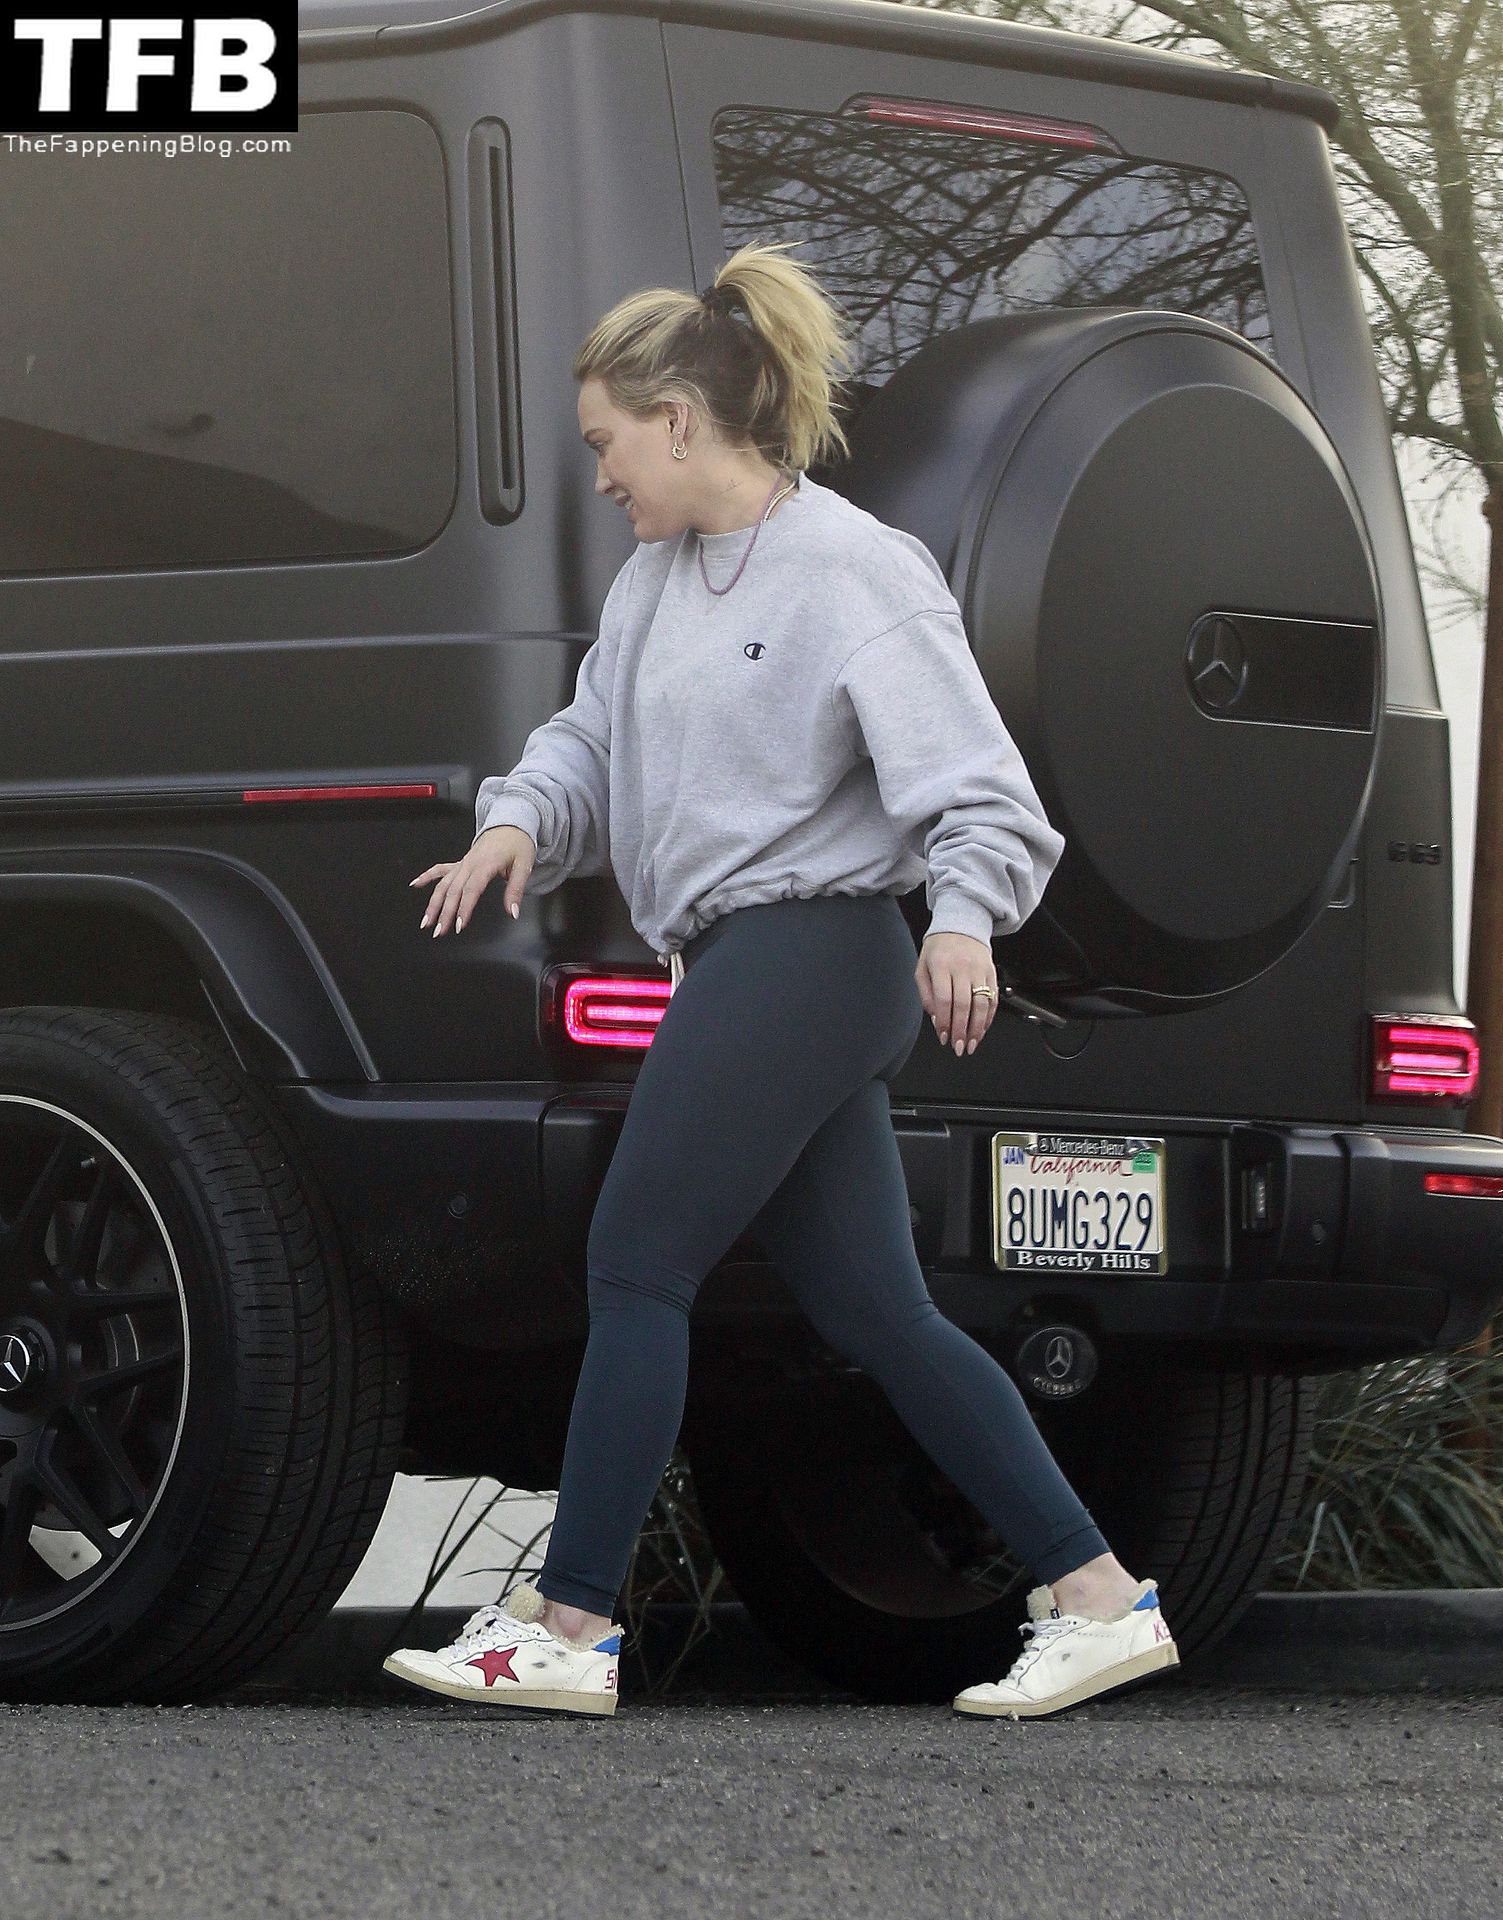 Hilary-Duff-shows-off-impressive-gym-results-in-a-pair-of-skintight-leggings-during-LA-errand-run...-one-day-after-hosting-quaint-Thanksgiving-gathering-at-her-home-The-Fappening-Blog-8.jpg